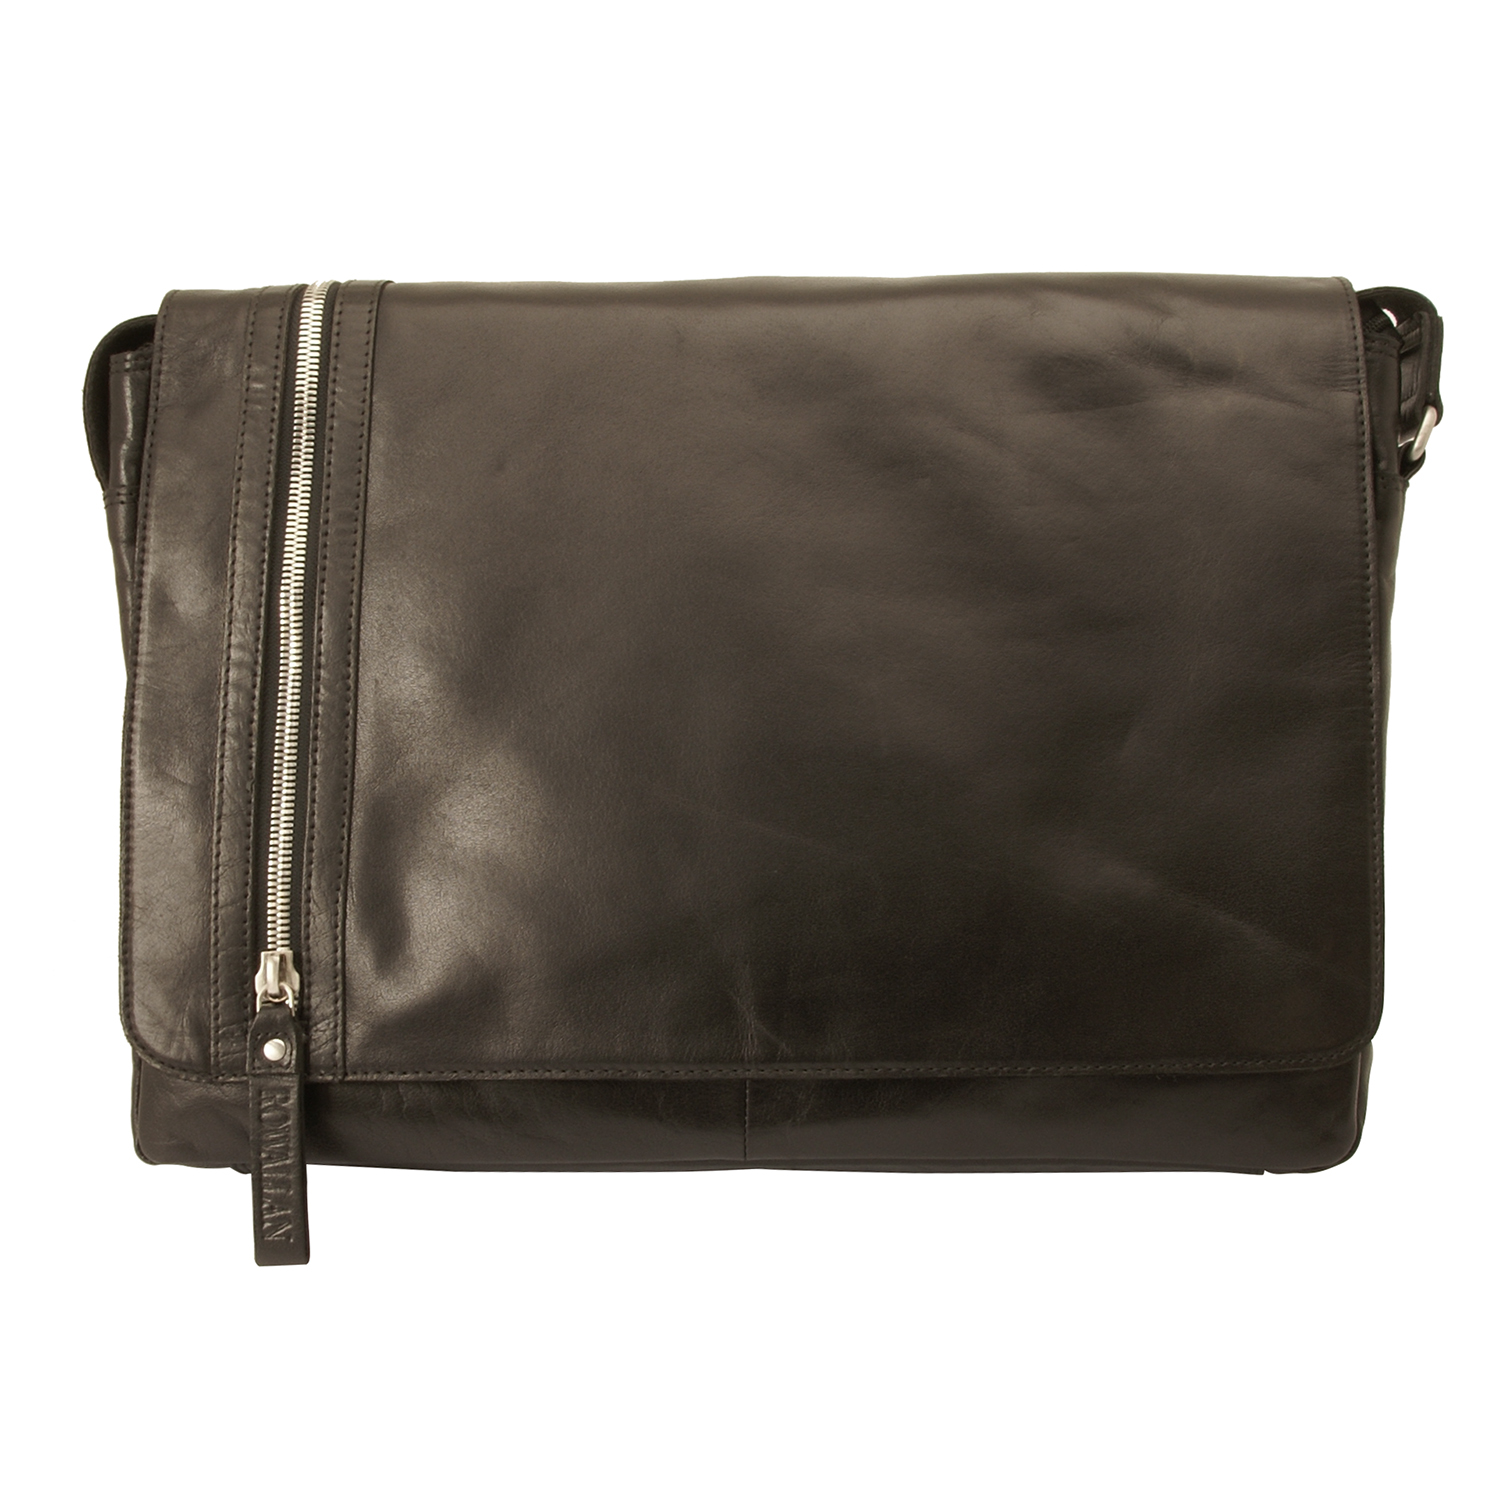 Rowallan - Large Black Conquest Messenger Laptop Bag in Buffalo Leather ...